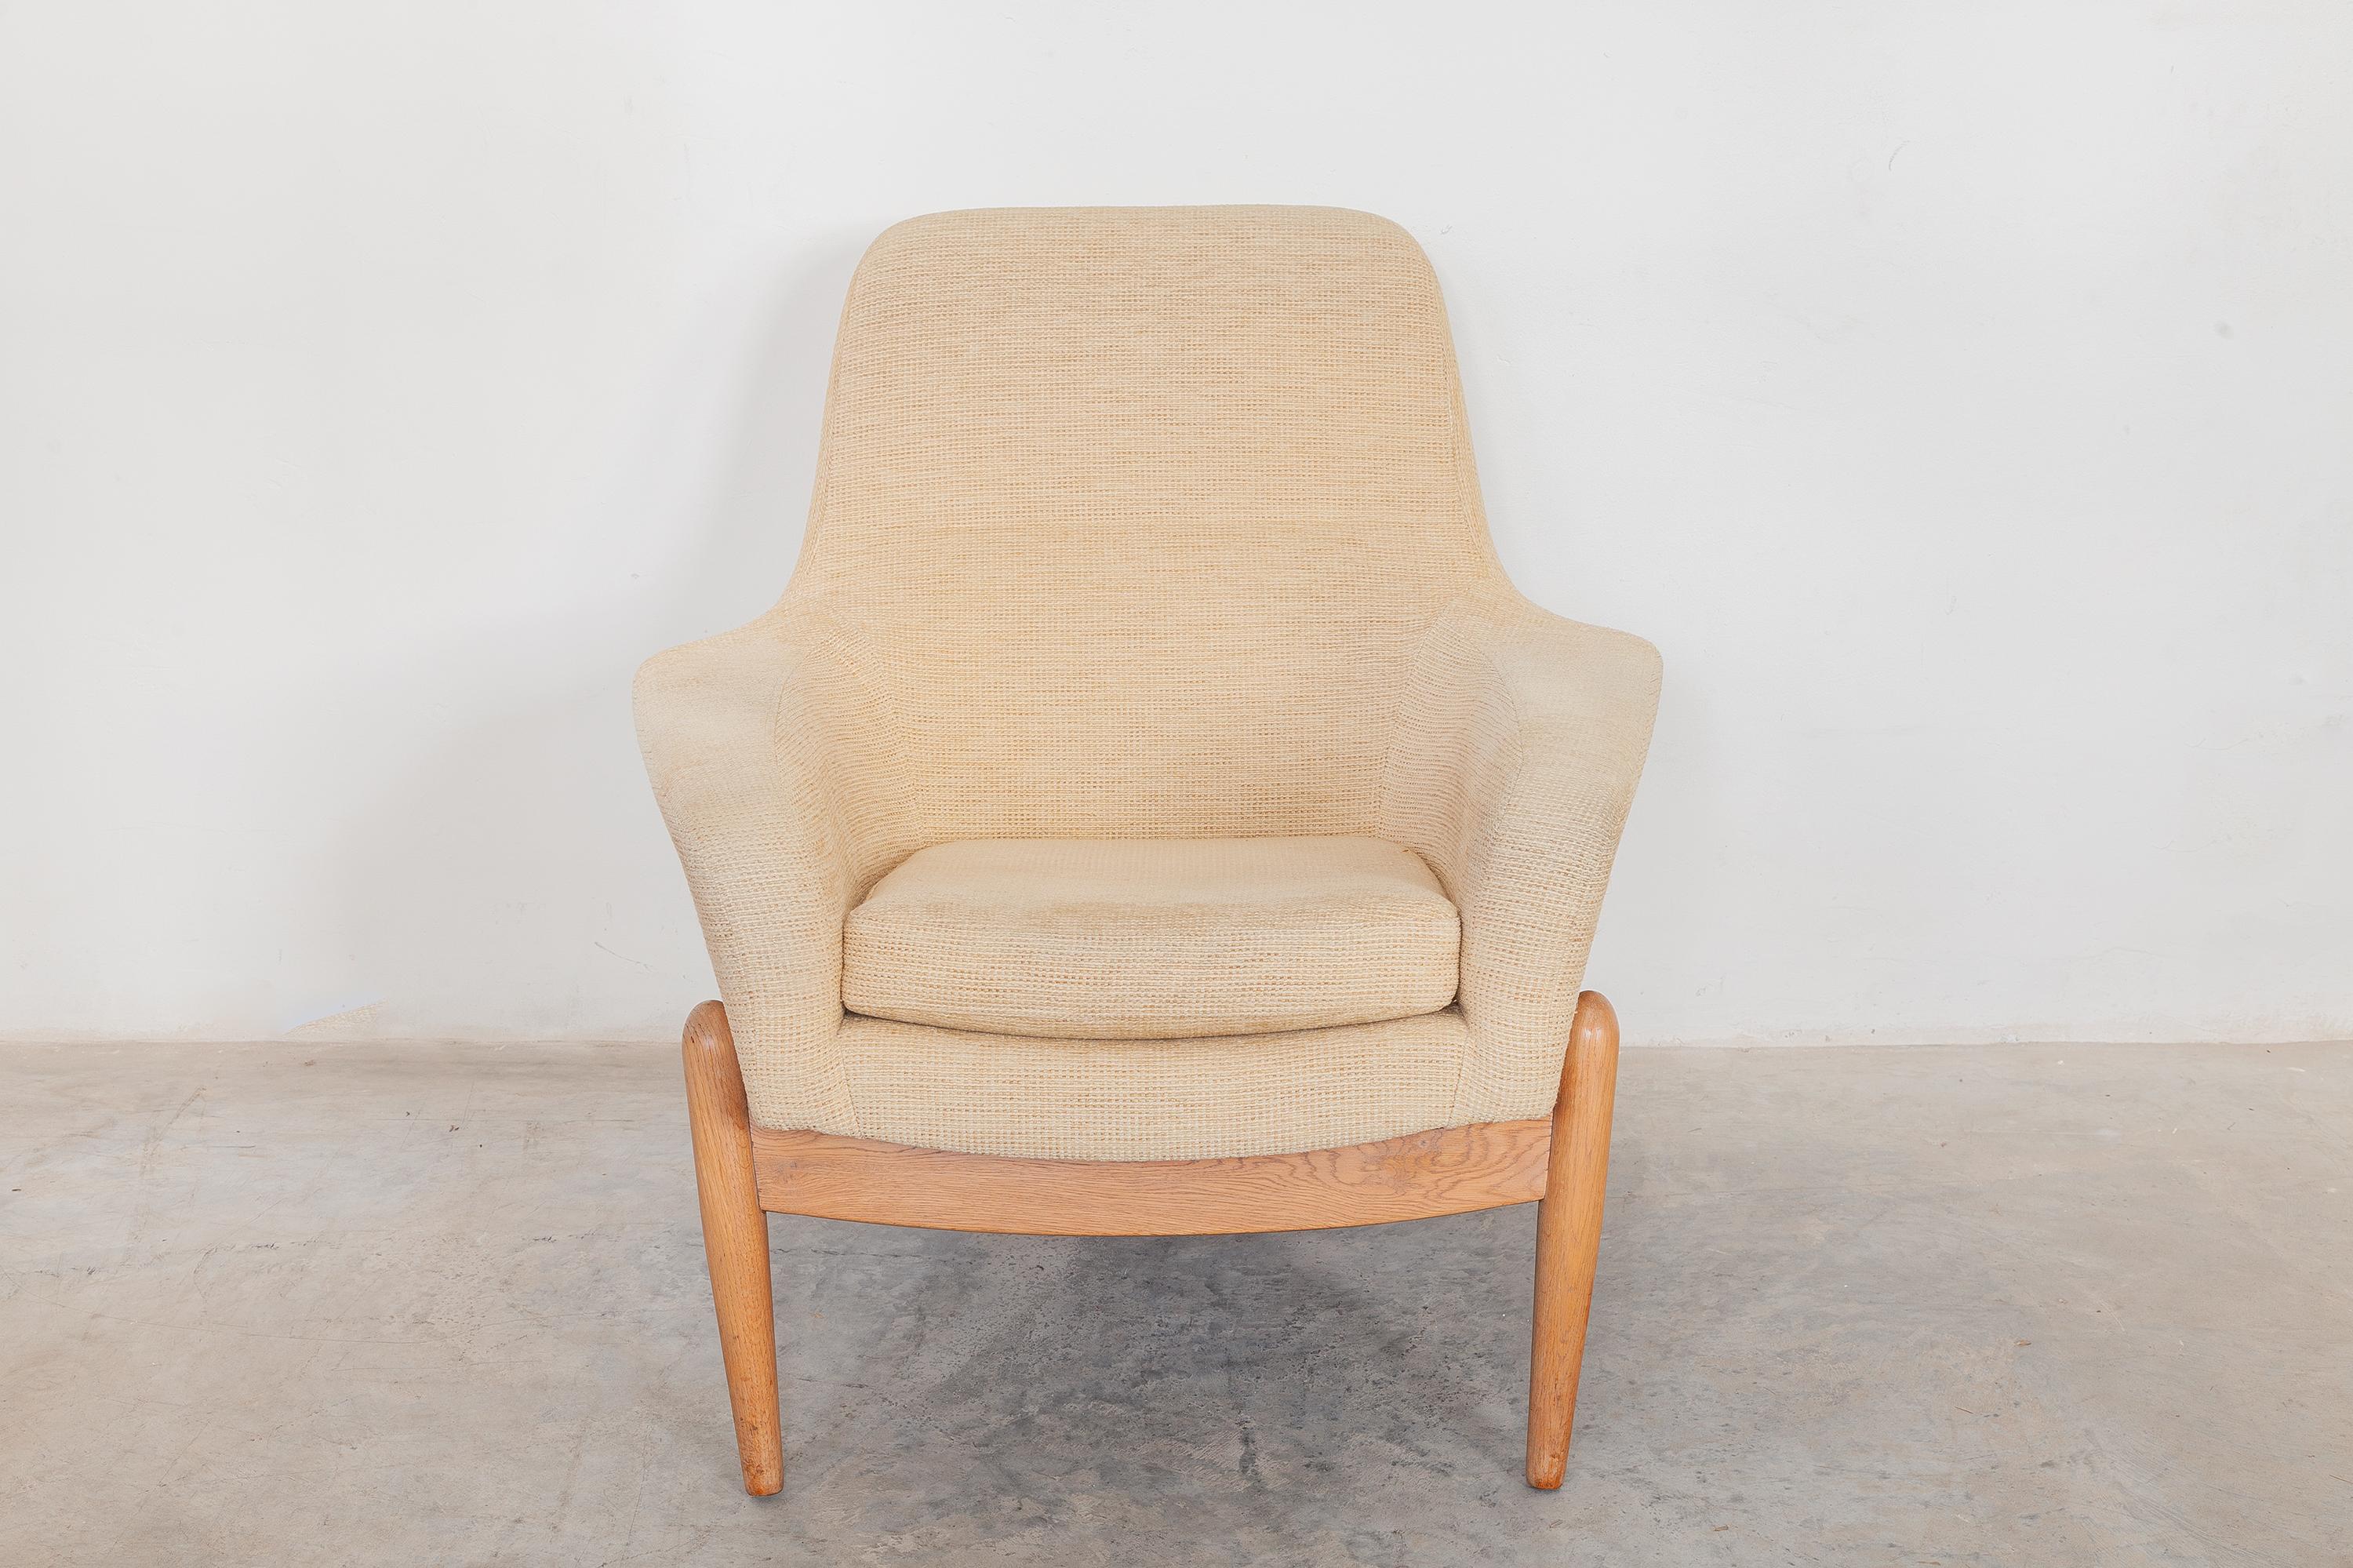 Set of two midcentury Scandinavian lady's lounge chairs by Ib Kofod Larsen for Bovenkamp in the Netherlands, 1950s. Classic comfortable design organic carved solid oak wood frames wit circular seats in original warm beige upholstery, in very good